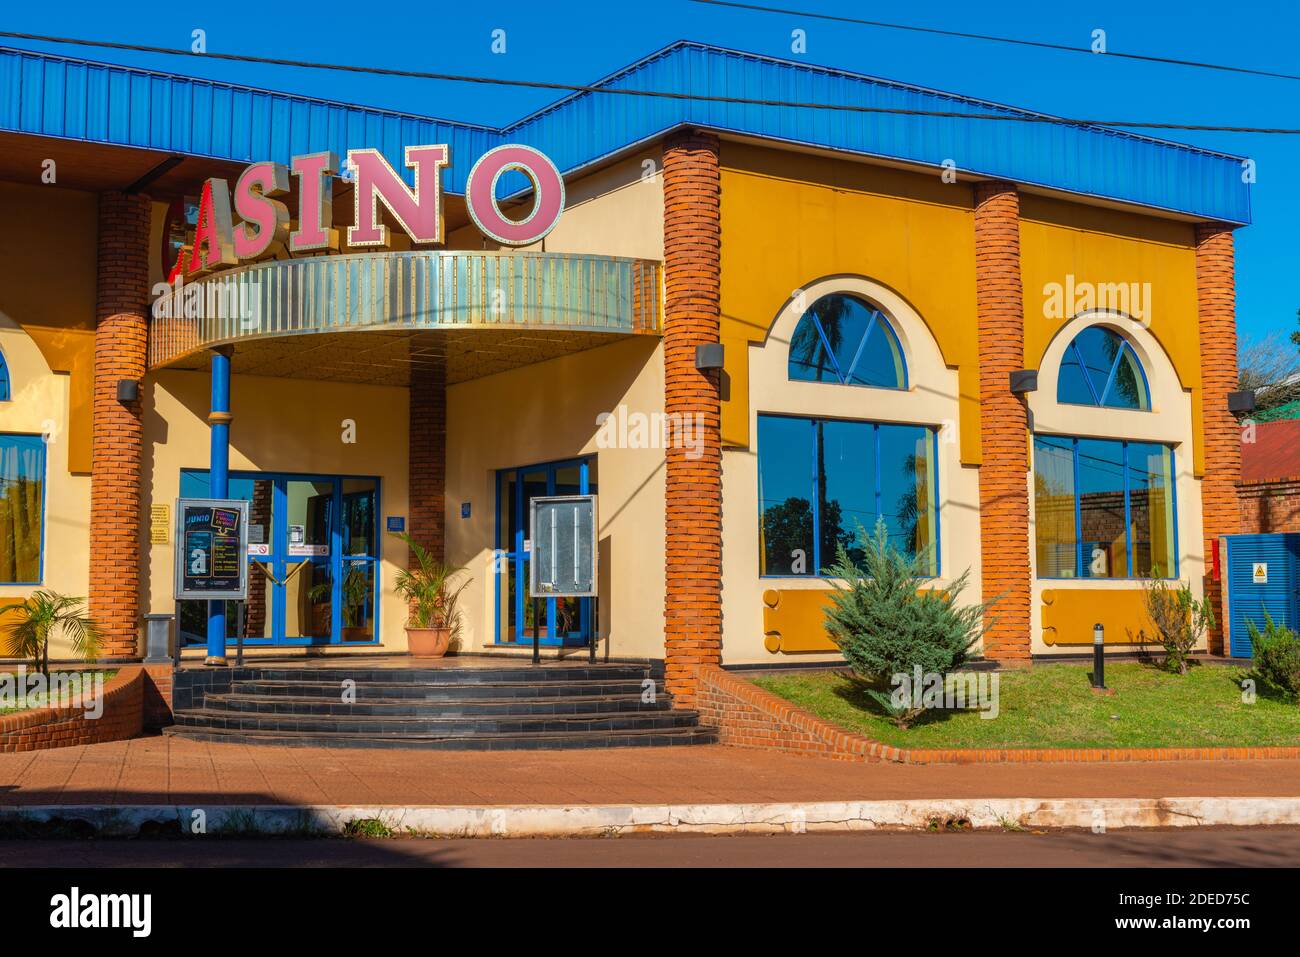 Gambling casino in the small town of  Montecarlo on the Paraná River, Provincia Misiones, Argentina, Latin America Stock Photo